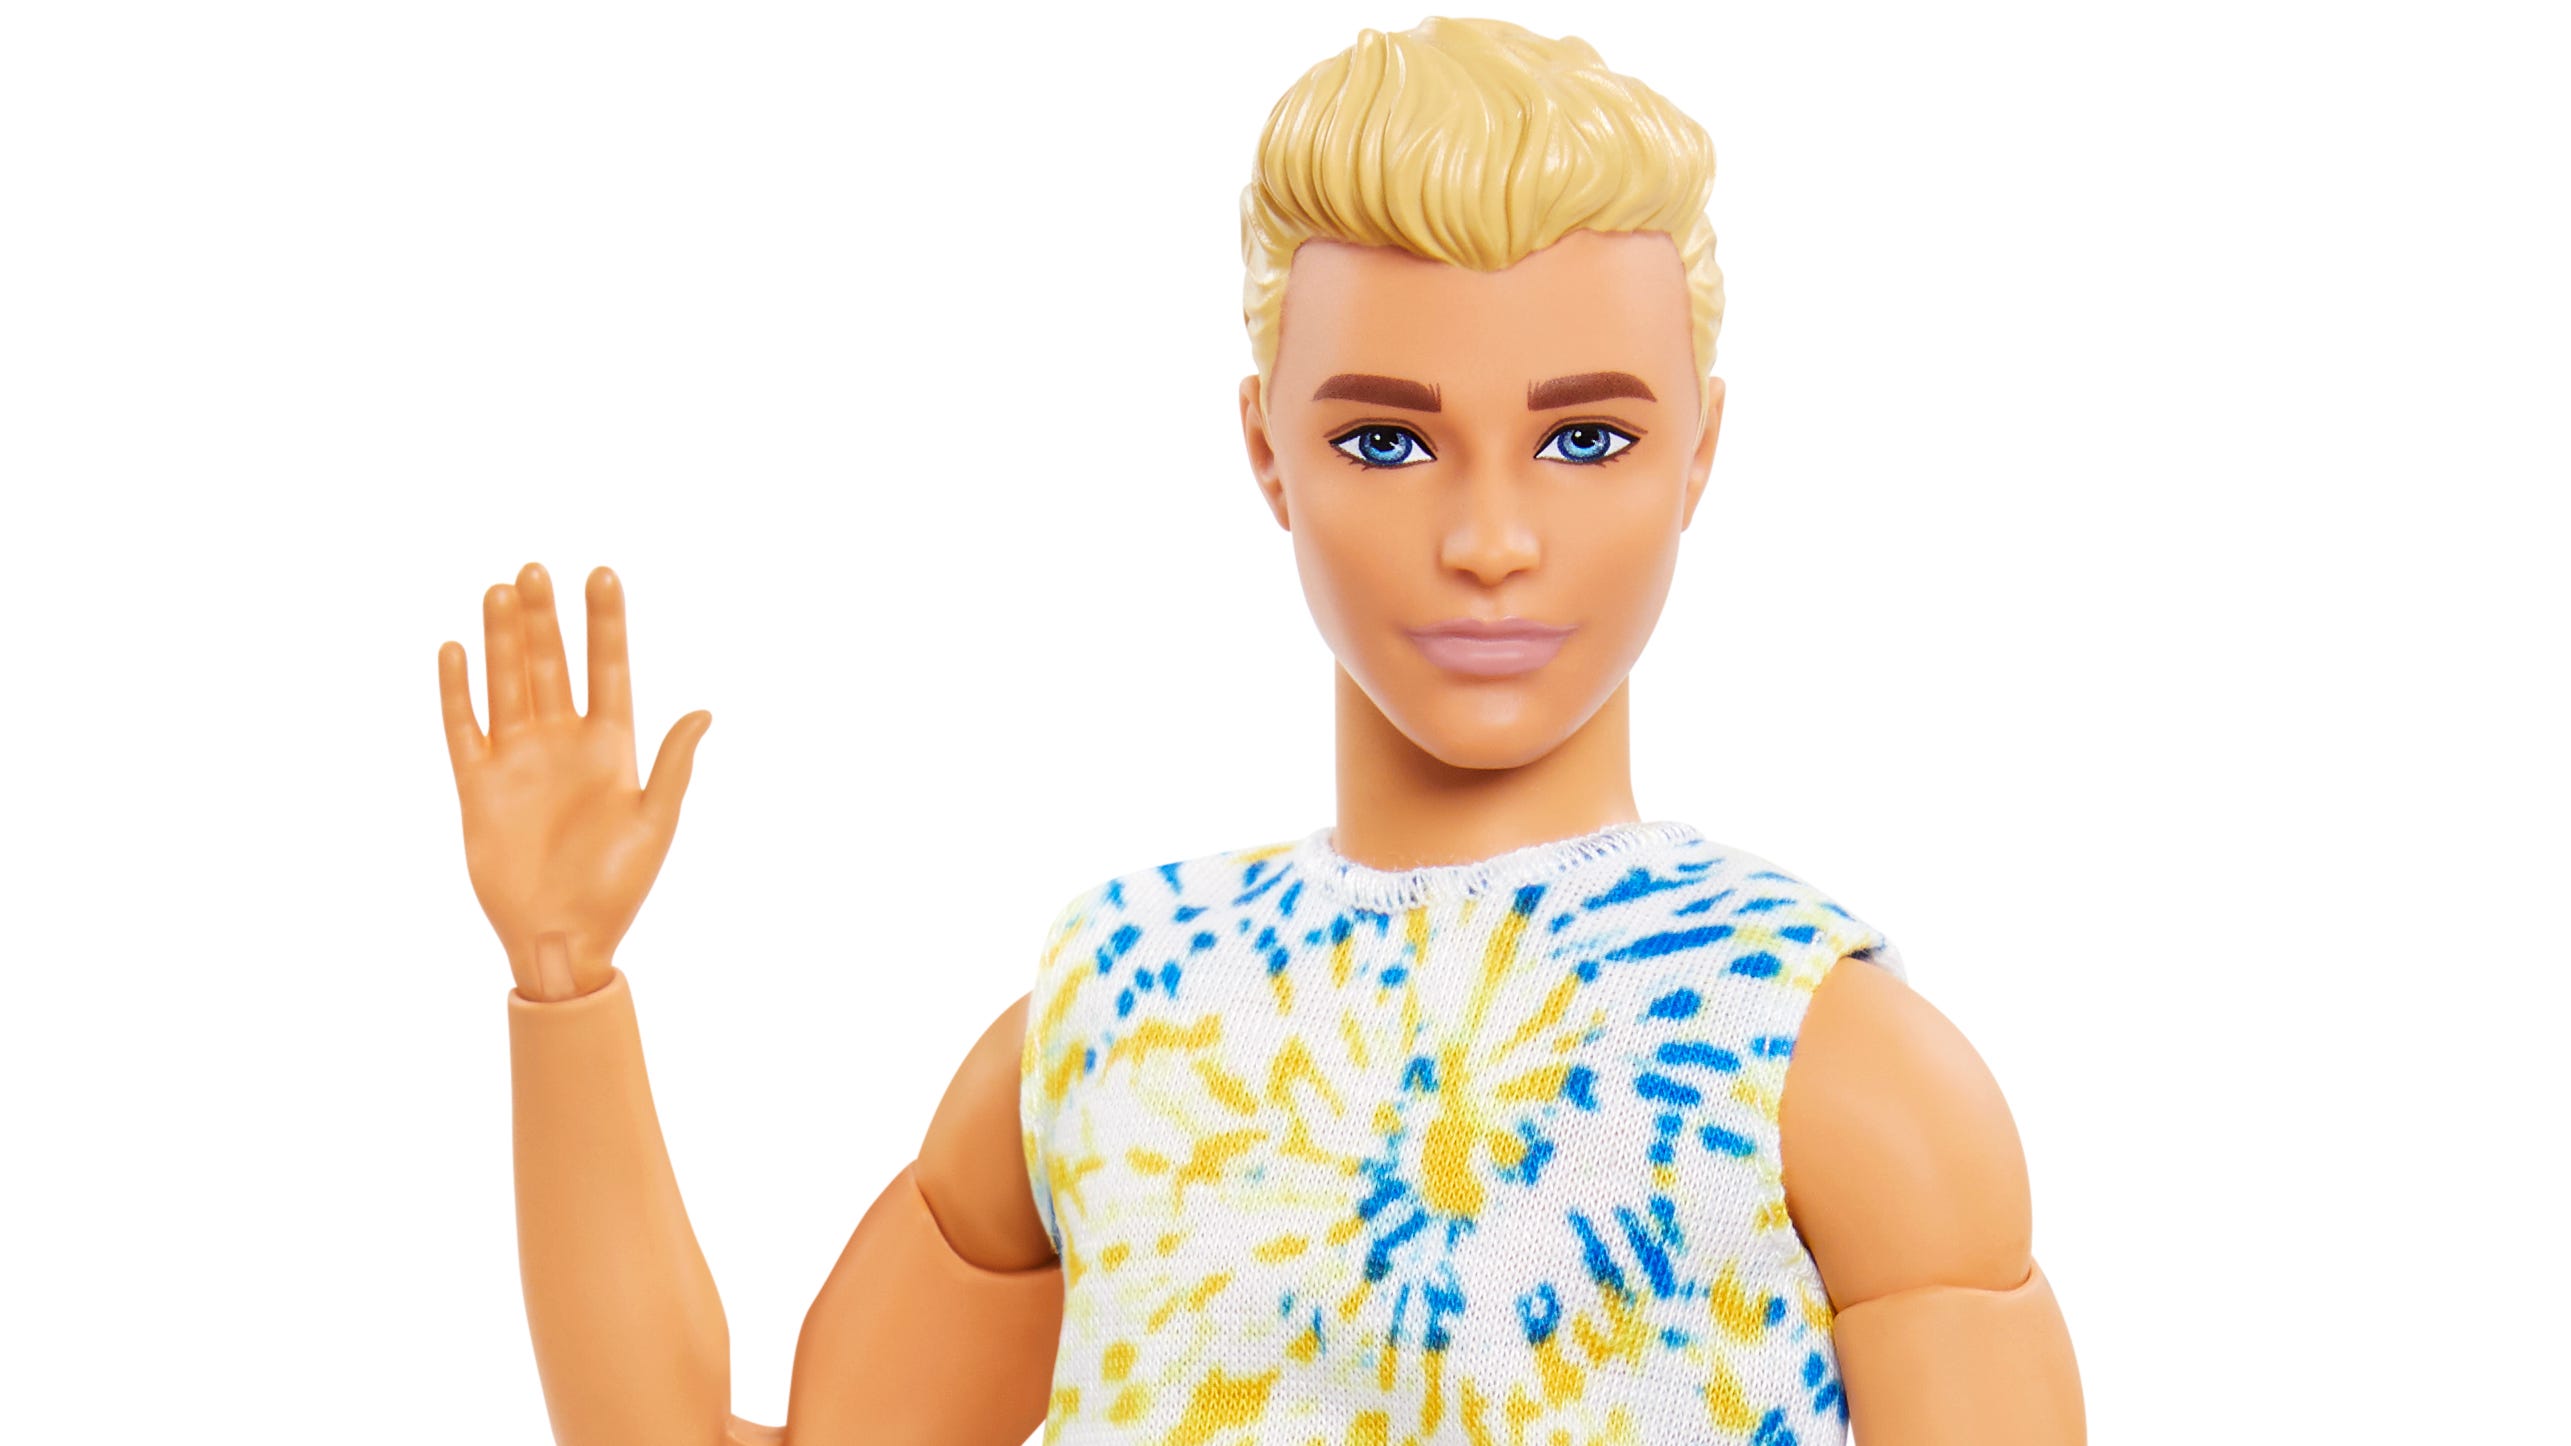 Ken doll turns 60 Barbie counterpart has changed a lot. See how